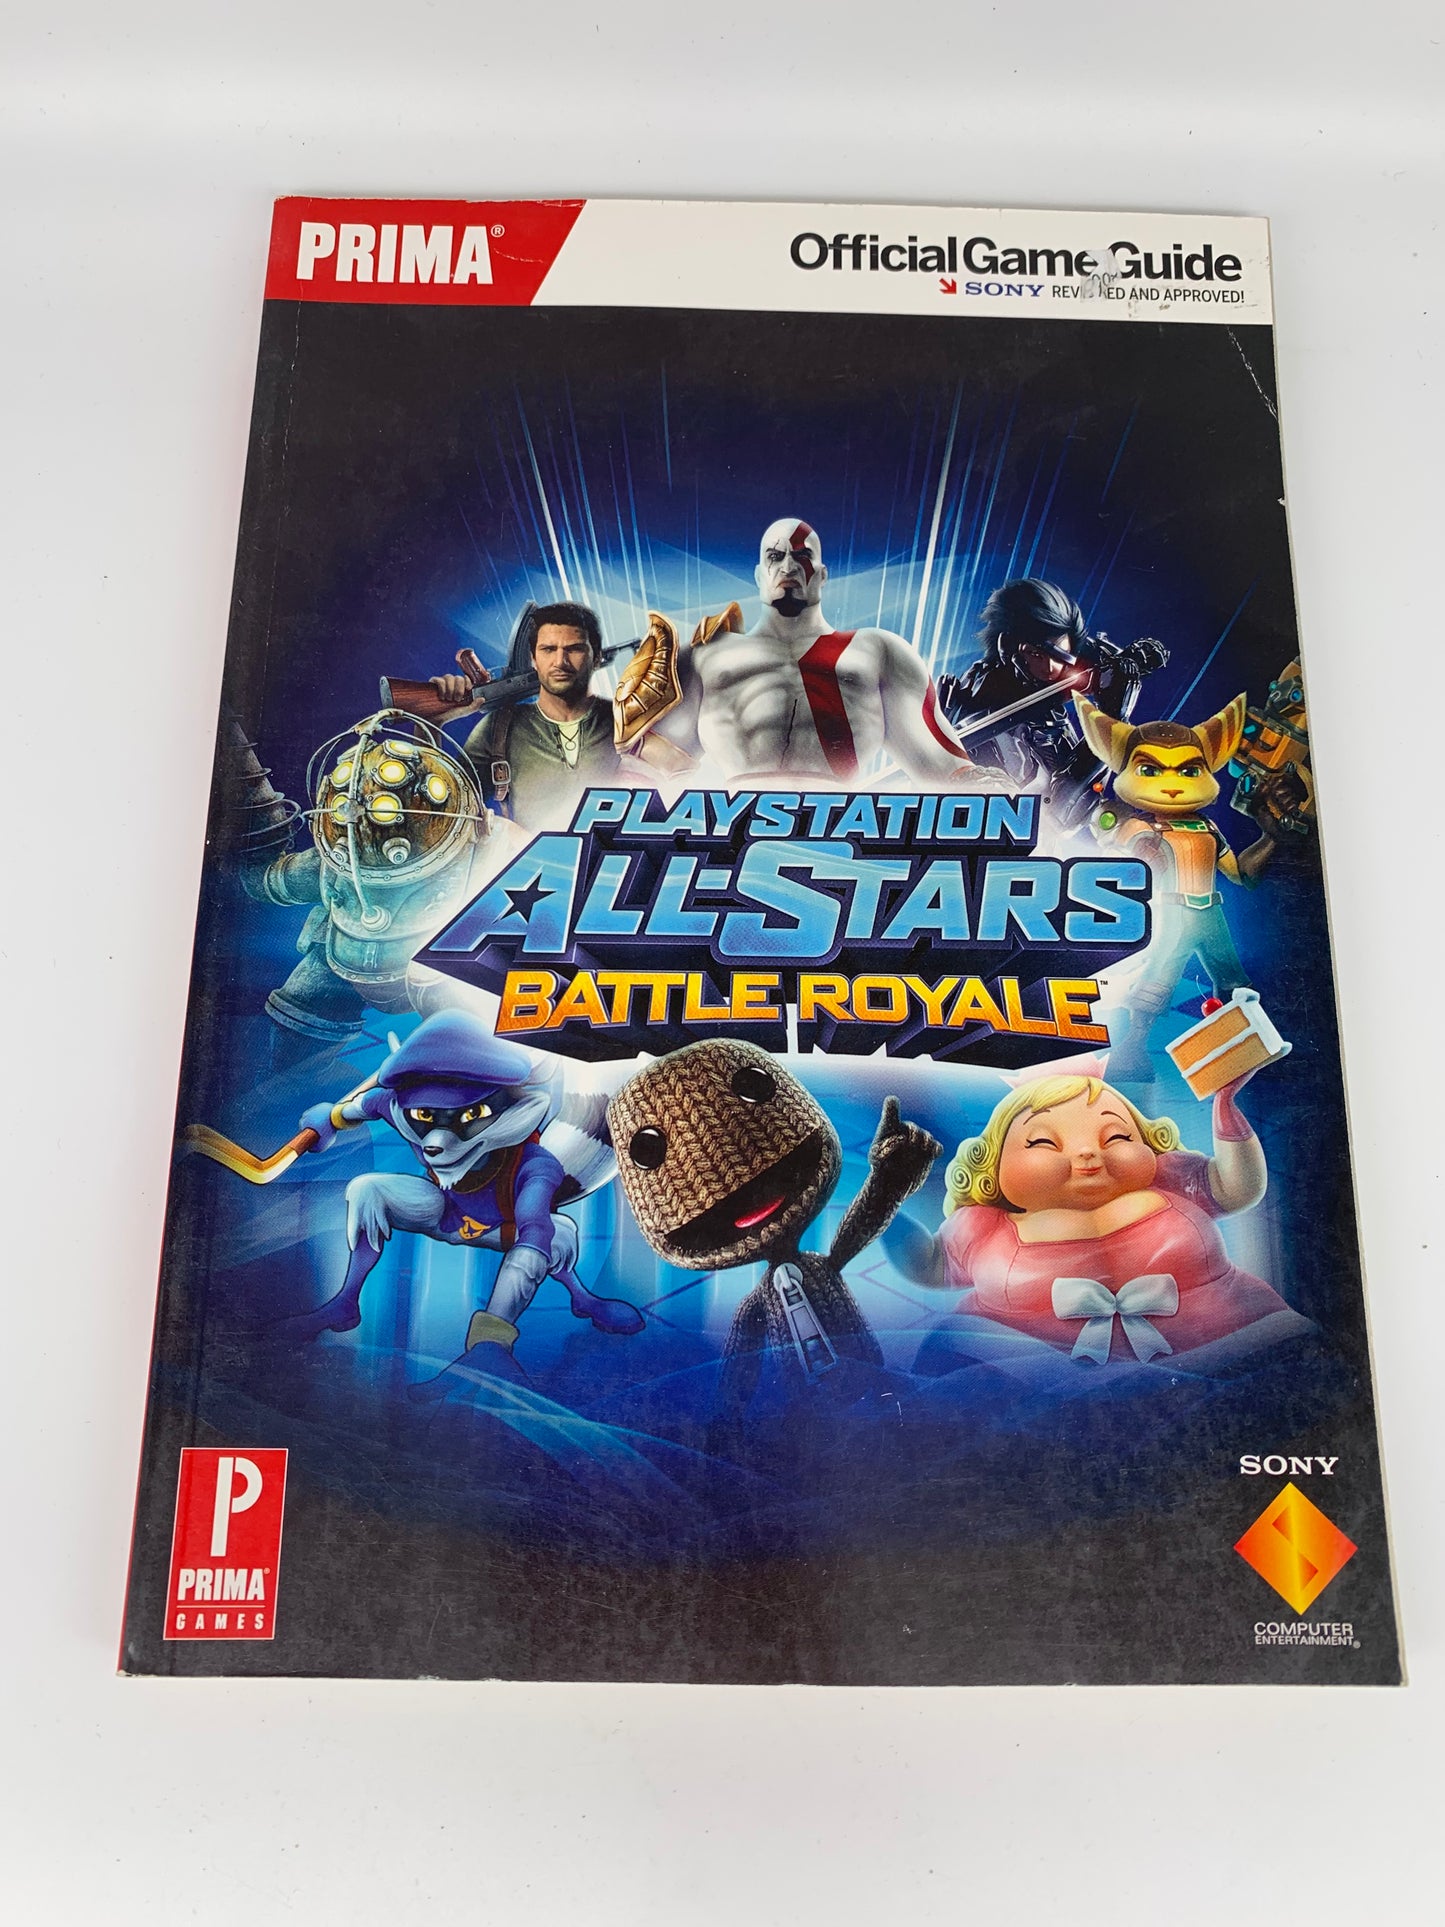 PiXEL-RETRO.COM : BOOKS STRATEGY PLAYER'S GUIDE WALKTHROUGH OFFICIAL PRIMA PLAYSTATION ALL-STARS BATTLE ROYALE